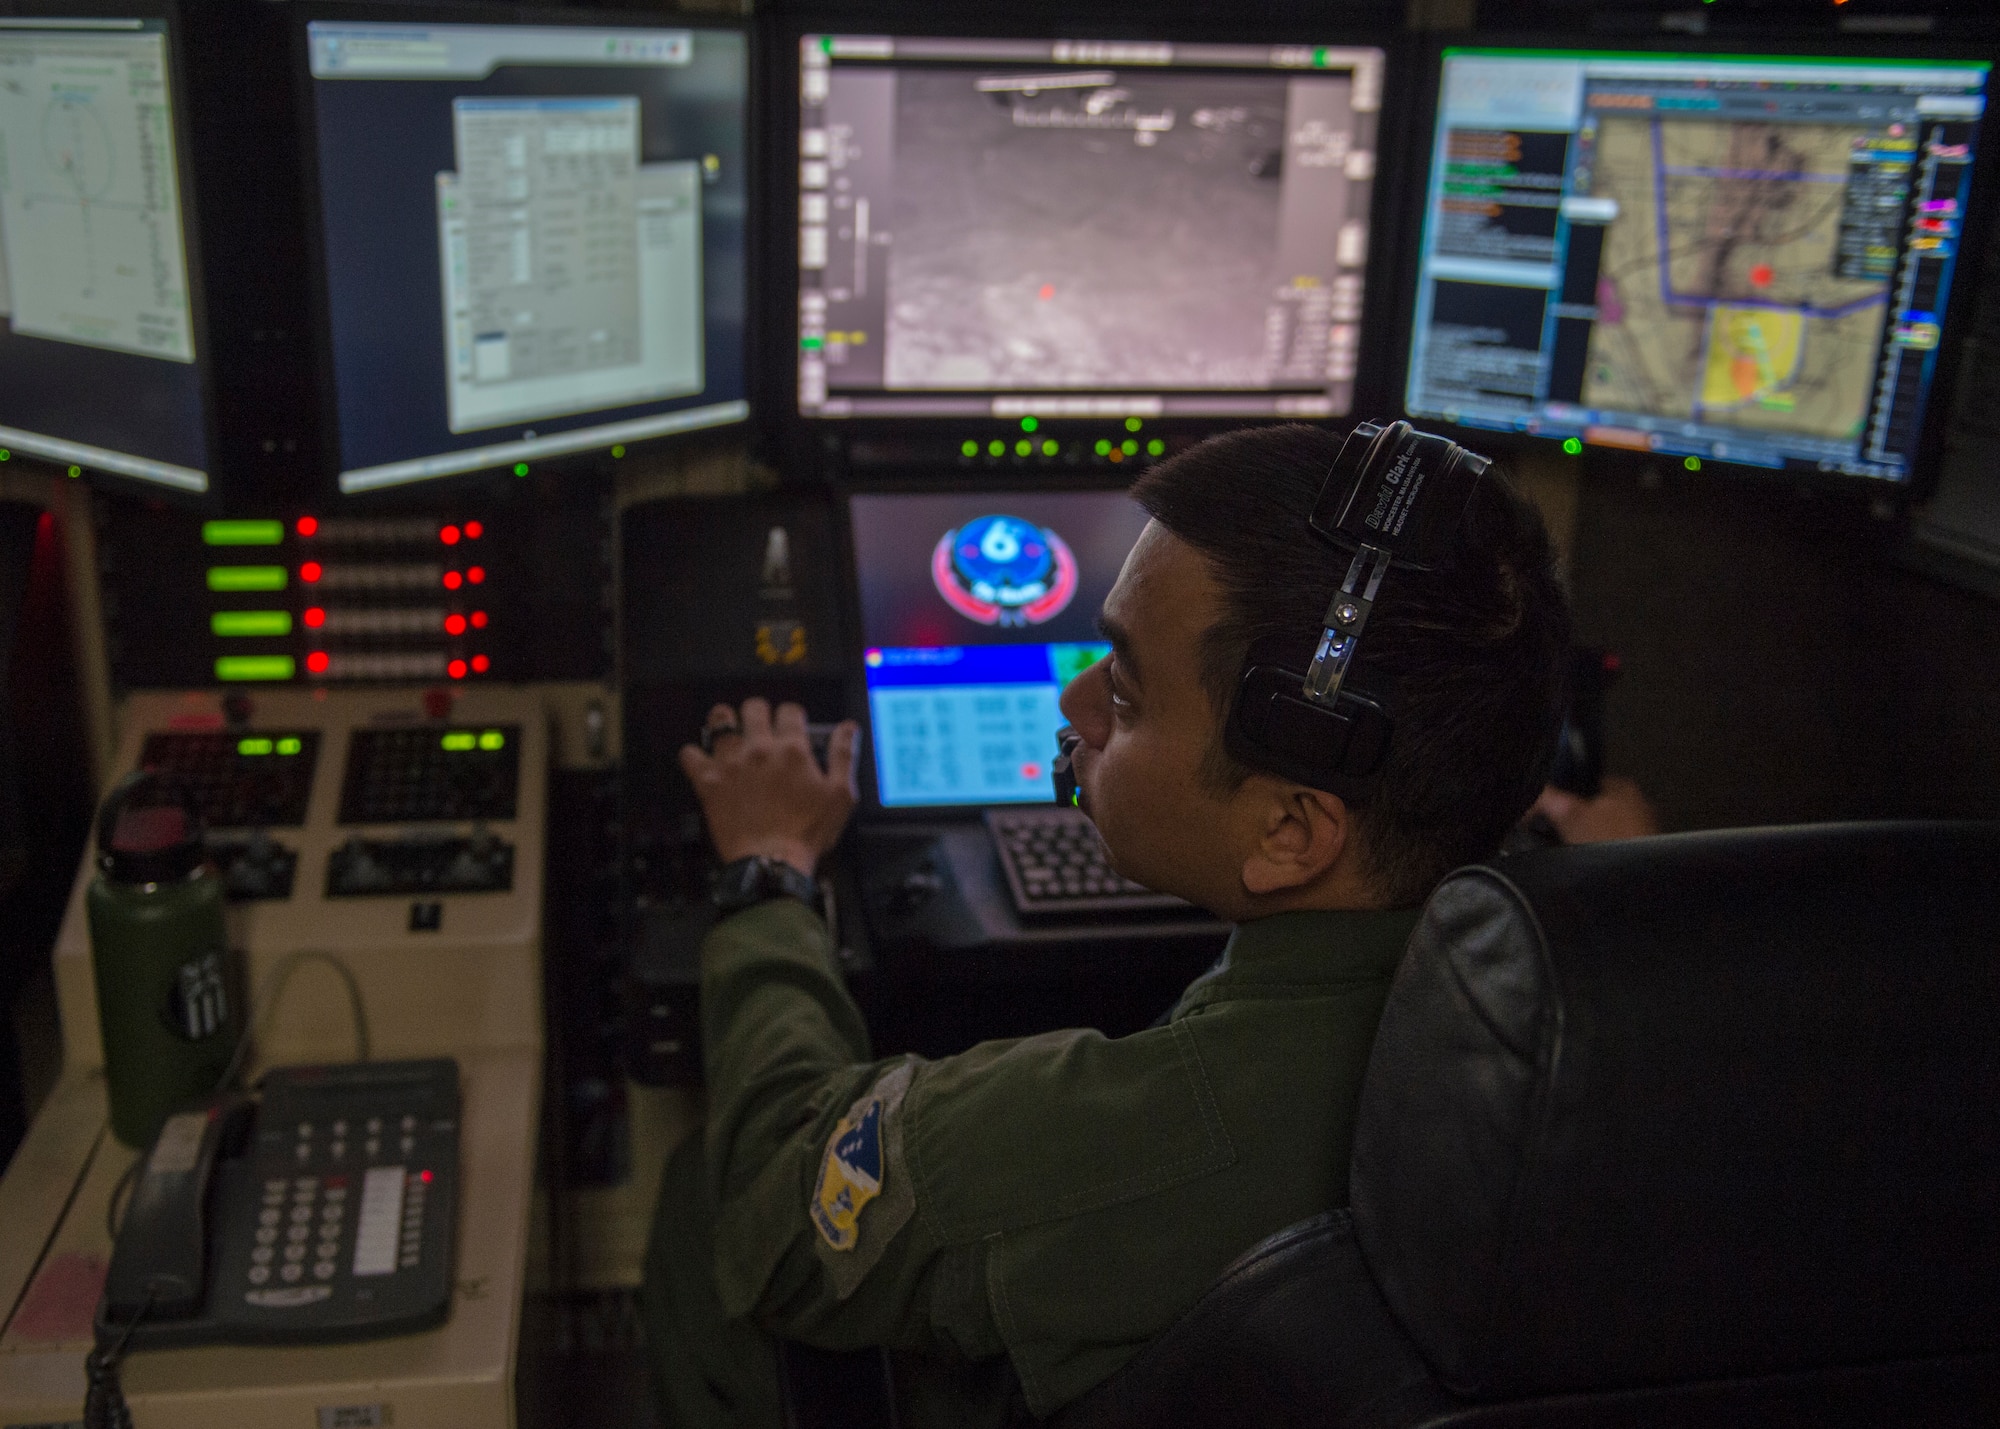 Tech. Sgt. Joaquin, 6th Attack Squadron MQ-9 Reaper sensor operator instructor, coordinates with the pilot during an exercise over Red Rio Range, N.M., March 14, 2019, at the 6th Attack Squadron on Holloman Air Force Base, N.M. Intelligence, surveillance, reconnaissance, close air support and combat search and rescue are only a few of the missions and tasks the MQ-9 can perform. (U.S. Air Force photo by Airman 1st Class Kindra Stewart)